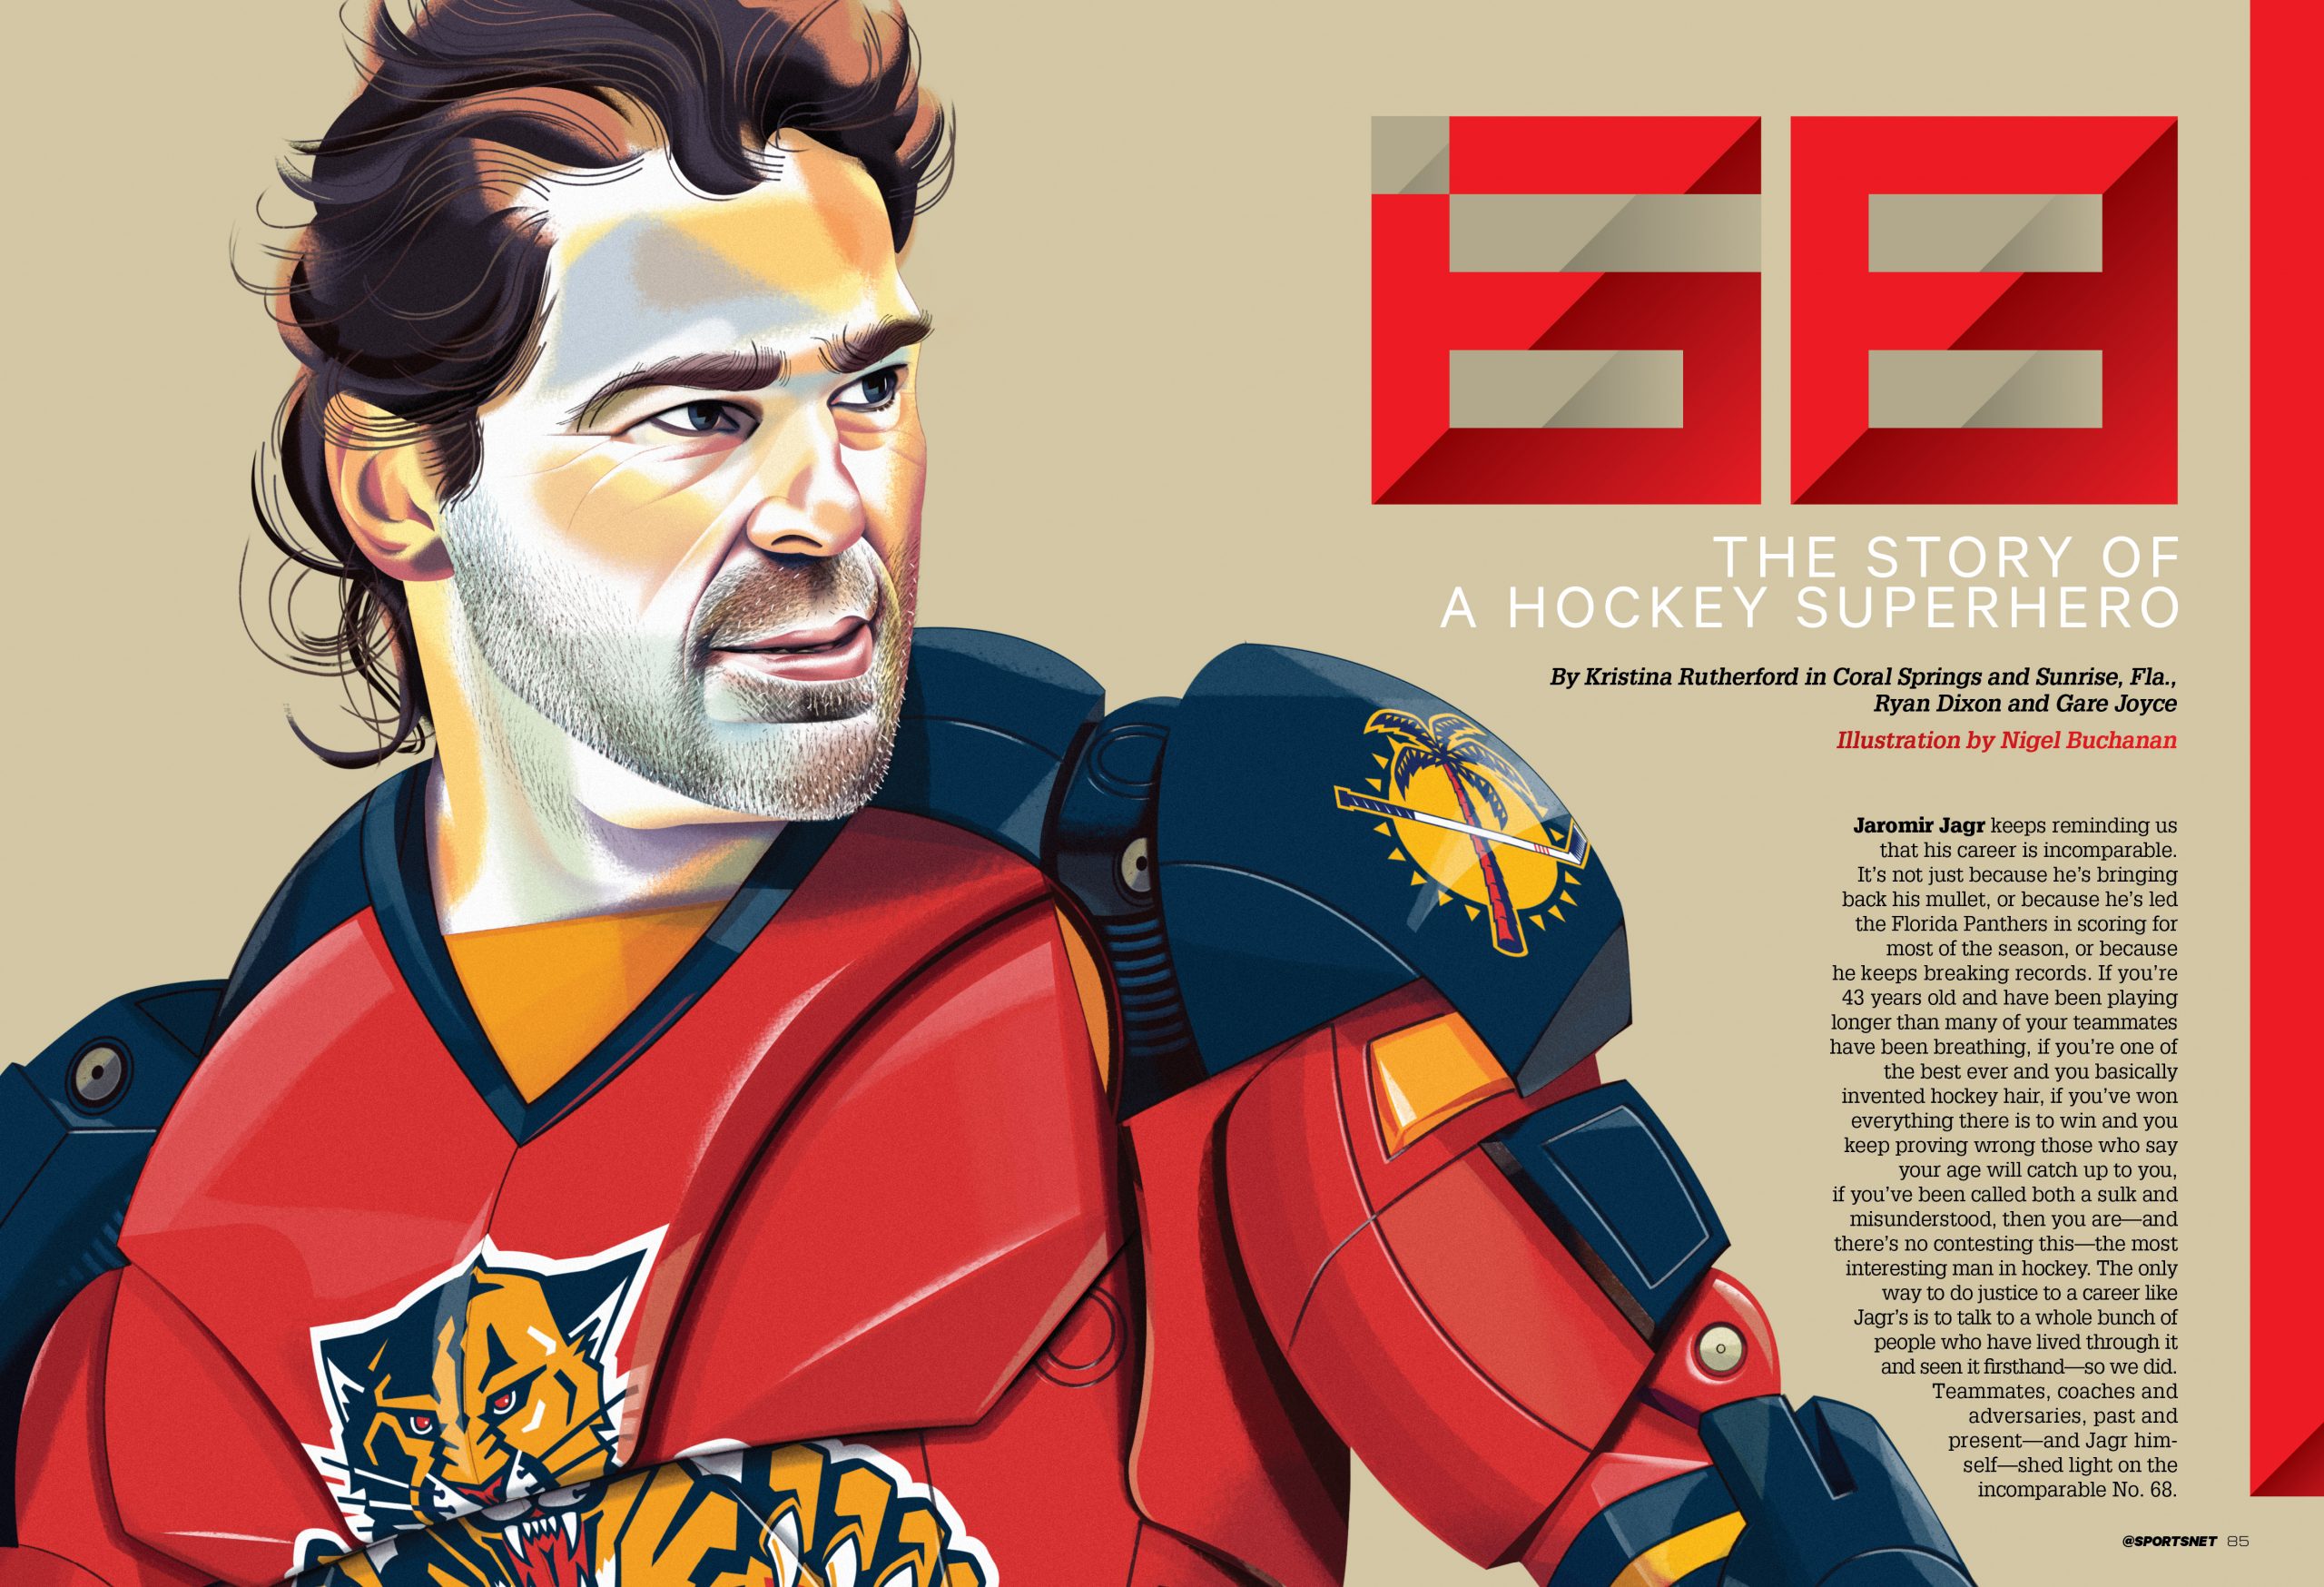 50-year-old Jaromir Jagr joked about playing in the NHL again - ESPN